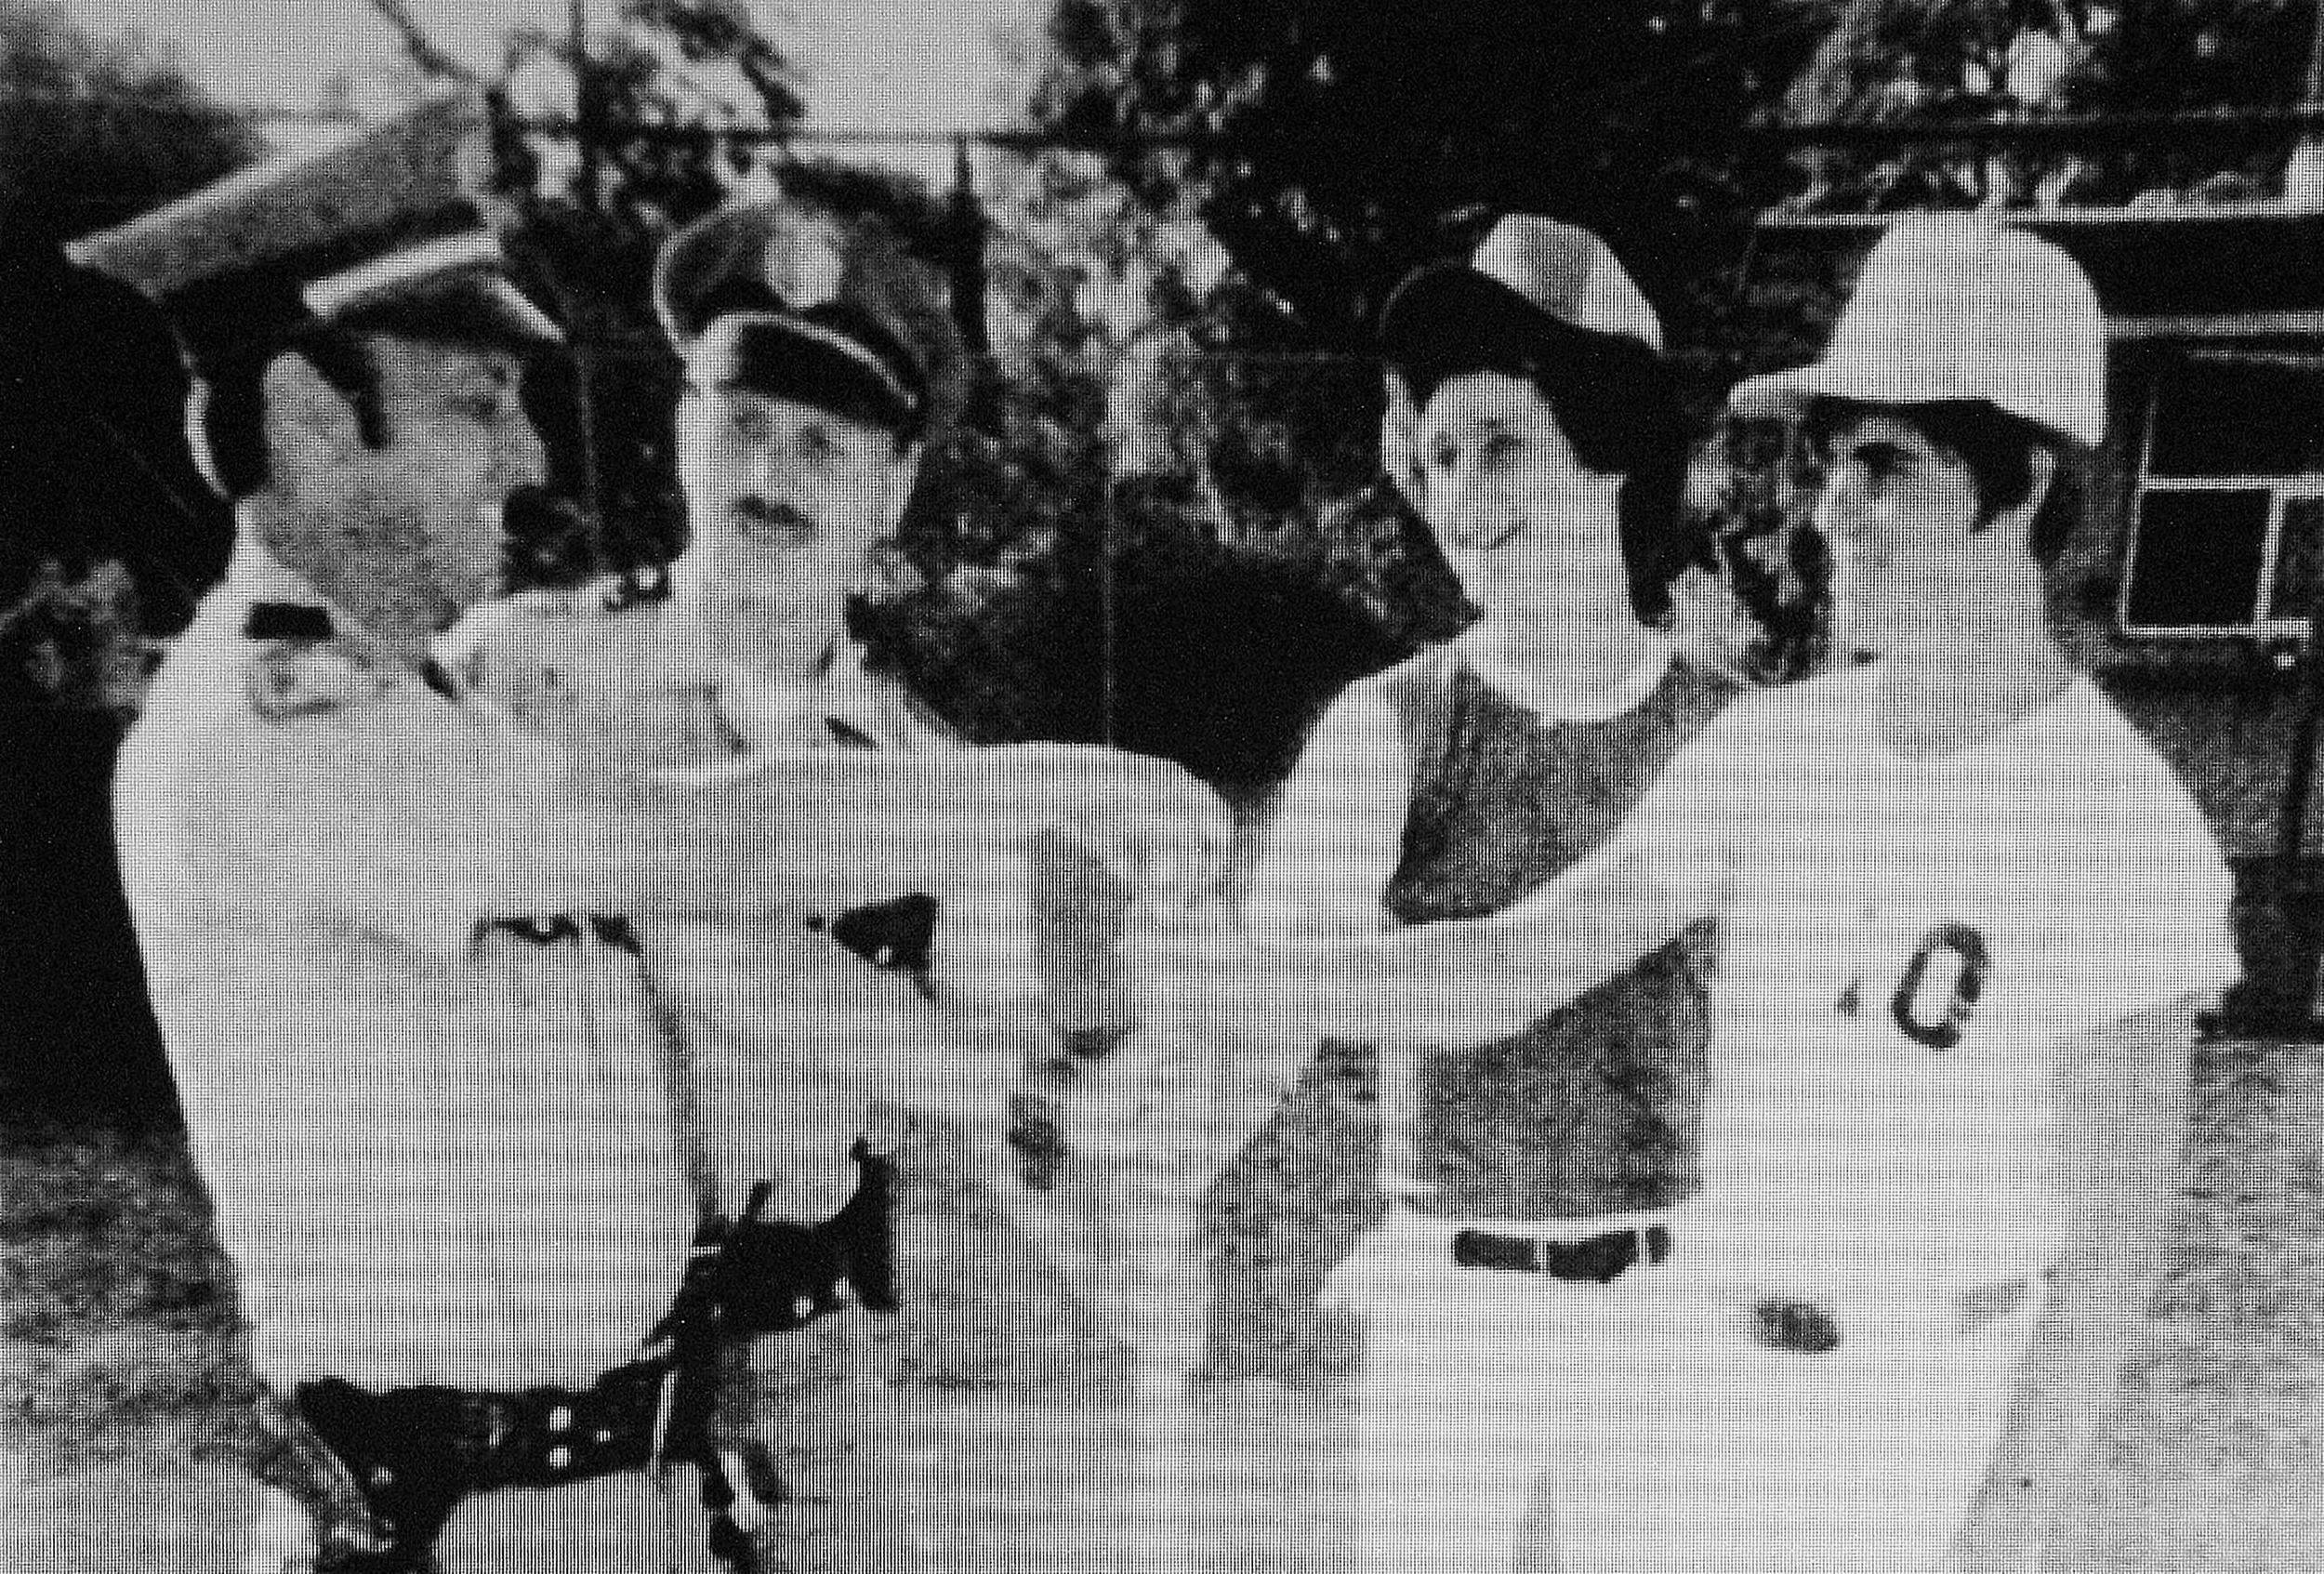 PHOTO: Suspected "Golden State Killer," Joseph James DeAngelo, is seen second from the left while he was a police officer in 1979.